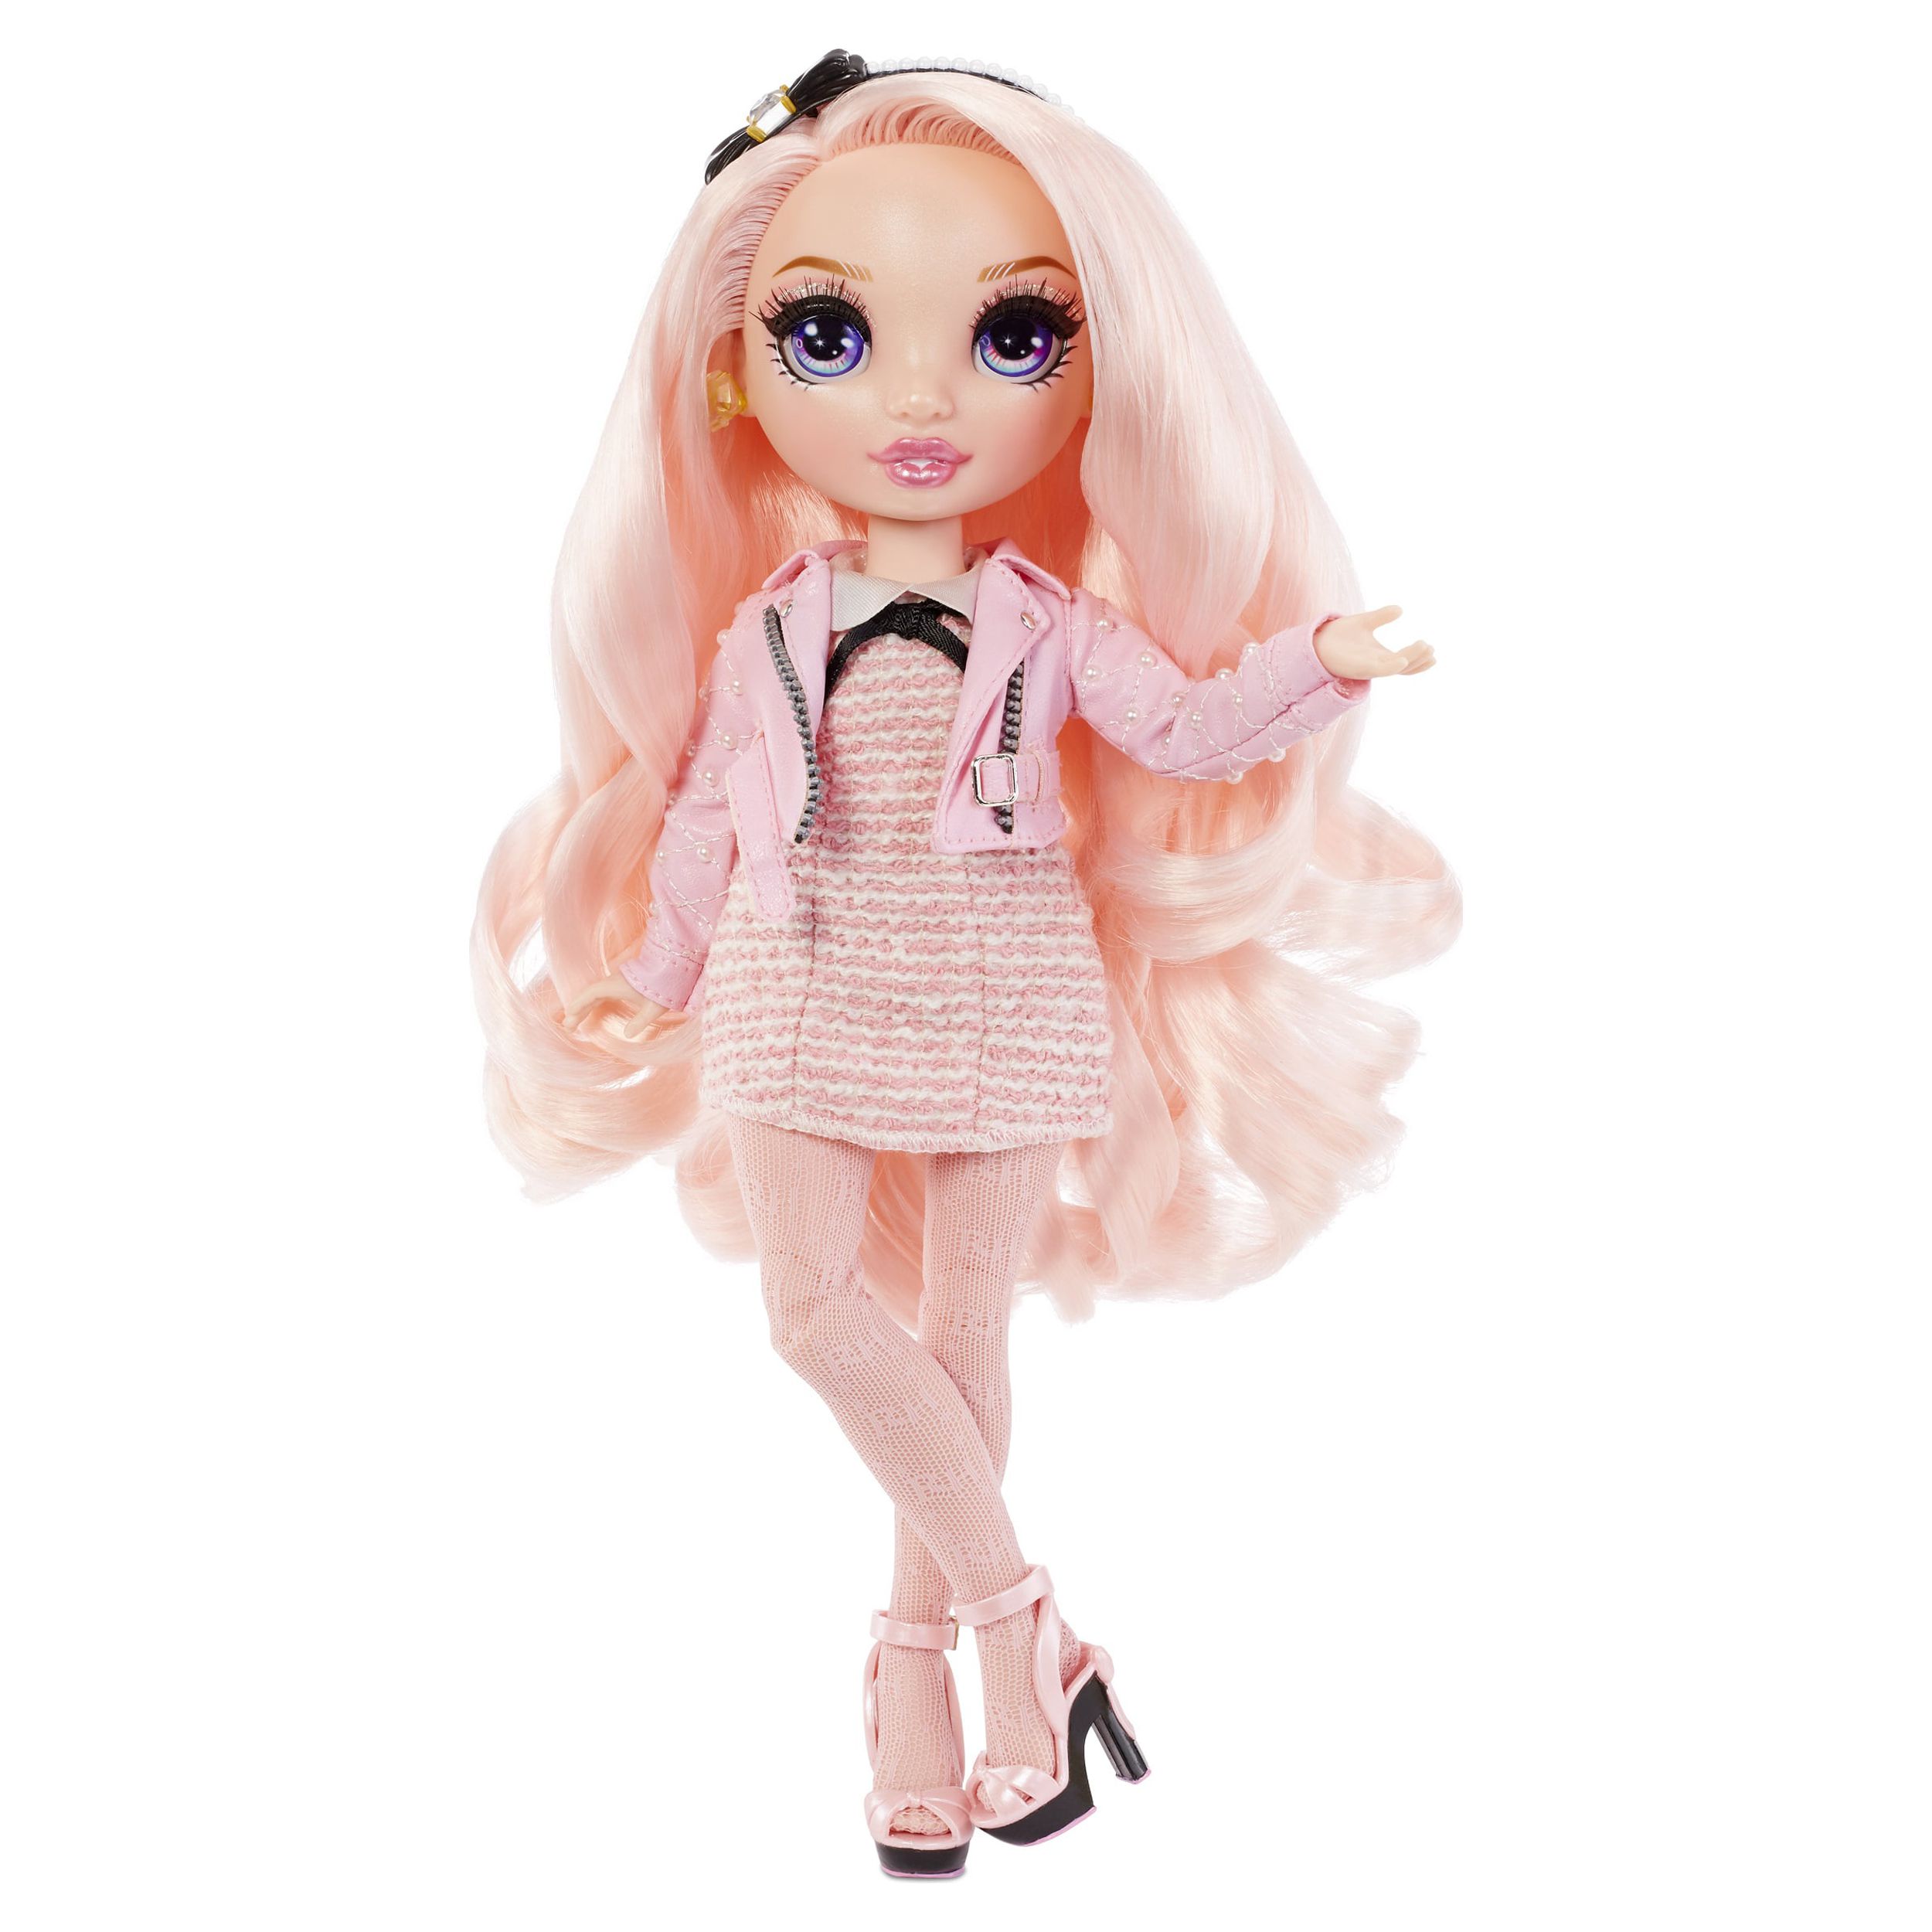 Rainbow High Bella Parker – Pink Fashion Doll with 2 Complete Mix & Match Outfits and Accessories, Toys for Kids 6-12 Years Old - image 5 of 7